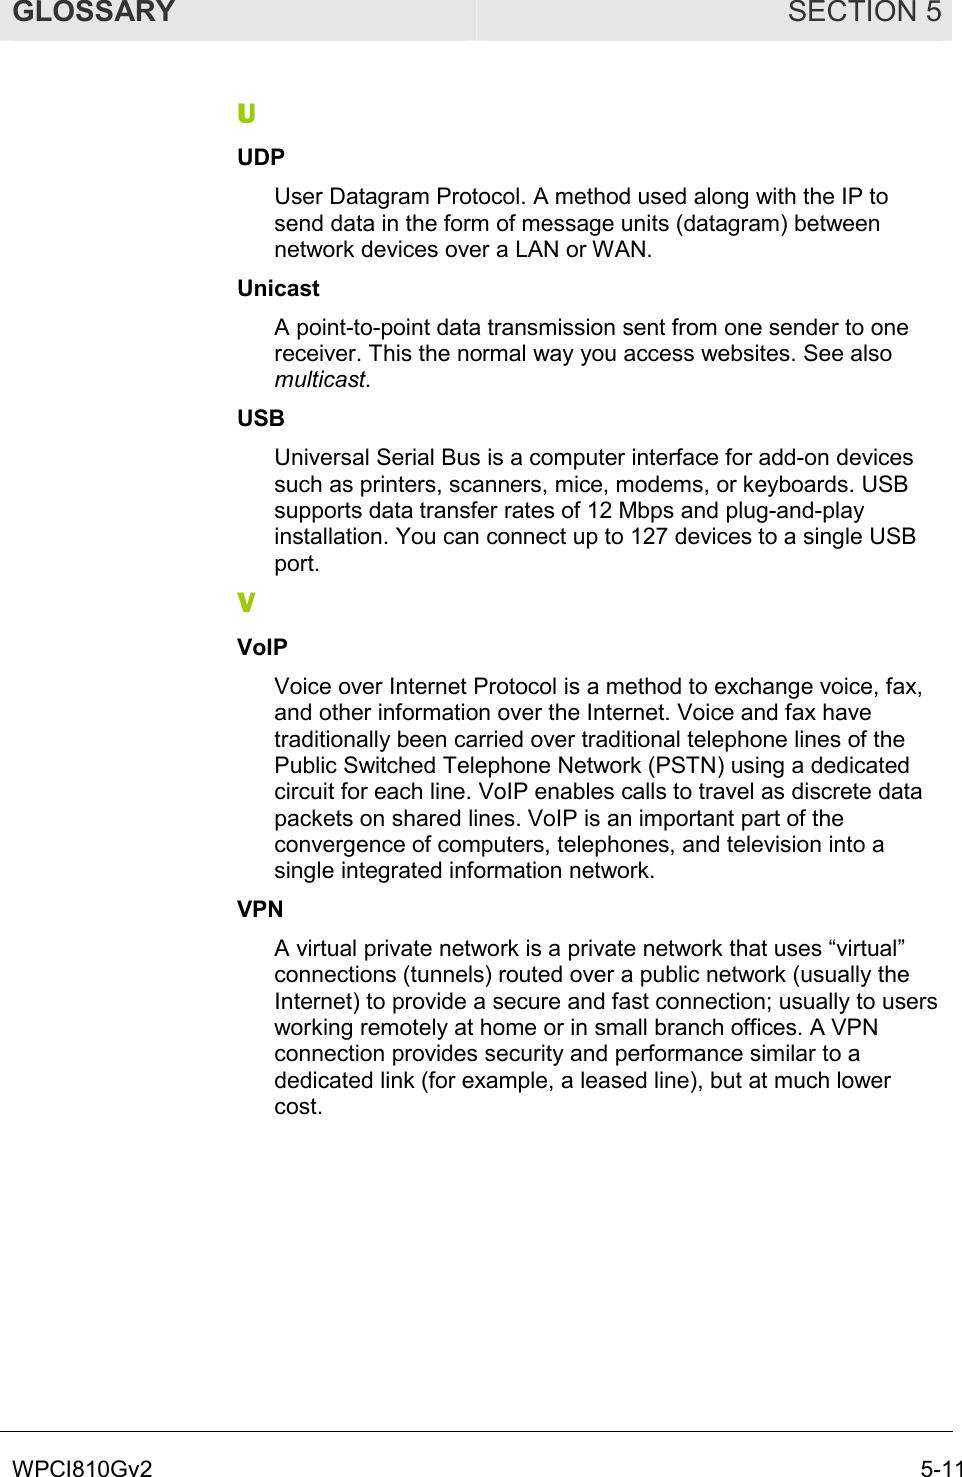 GLOSSARY SECTION 5 WPCI810Gv2  5-11 U UDP User Datagram Protocol. A method used along with the IP to send data in the form of message units (datagram) between network devices over a LAN or WAN.  Unicast A point-to-point data transmission sent from one sender to one receiver. This the normal way you access websites. See also multicast. USB Universal Serial Bus is a computer interface for add-on devices such as printers, scanners, mice, modems, or keyboards. USB supports data transfer rates of 12 Mbps and plug-and-play installation. You can connect up to 127 devices to a single USB port. V VoIP Voice over Internet Protocol is a method to exchange voice, fax, and other information over the Internet. Voice and fax have traditionally been carried over traditional telephone lines of the Public Switched Telephone Network (PSTN) using a dedicated circuit for each line. VoIP enables calls to travel as discrete data packets on shared lines. VoIP is an important part of the convergence of computers, telephones, and television into a single integrated information network. VPN A virtual private network is a private network that uses “virtual” connections (tunnels) routed over a public network (usually the Internet) to provide a secure and fast connection; usually to users working remotely at home or in small branch offices. A VPN connection provides security and performance similar to a dedicated link (for example, a leased line), but at much lower cost. 